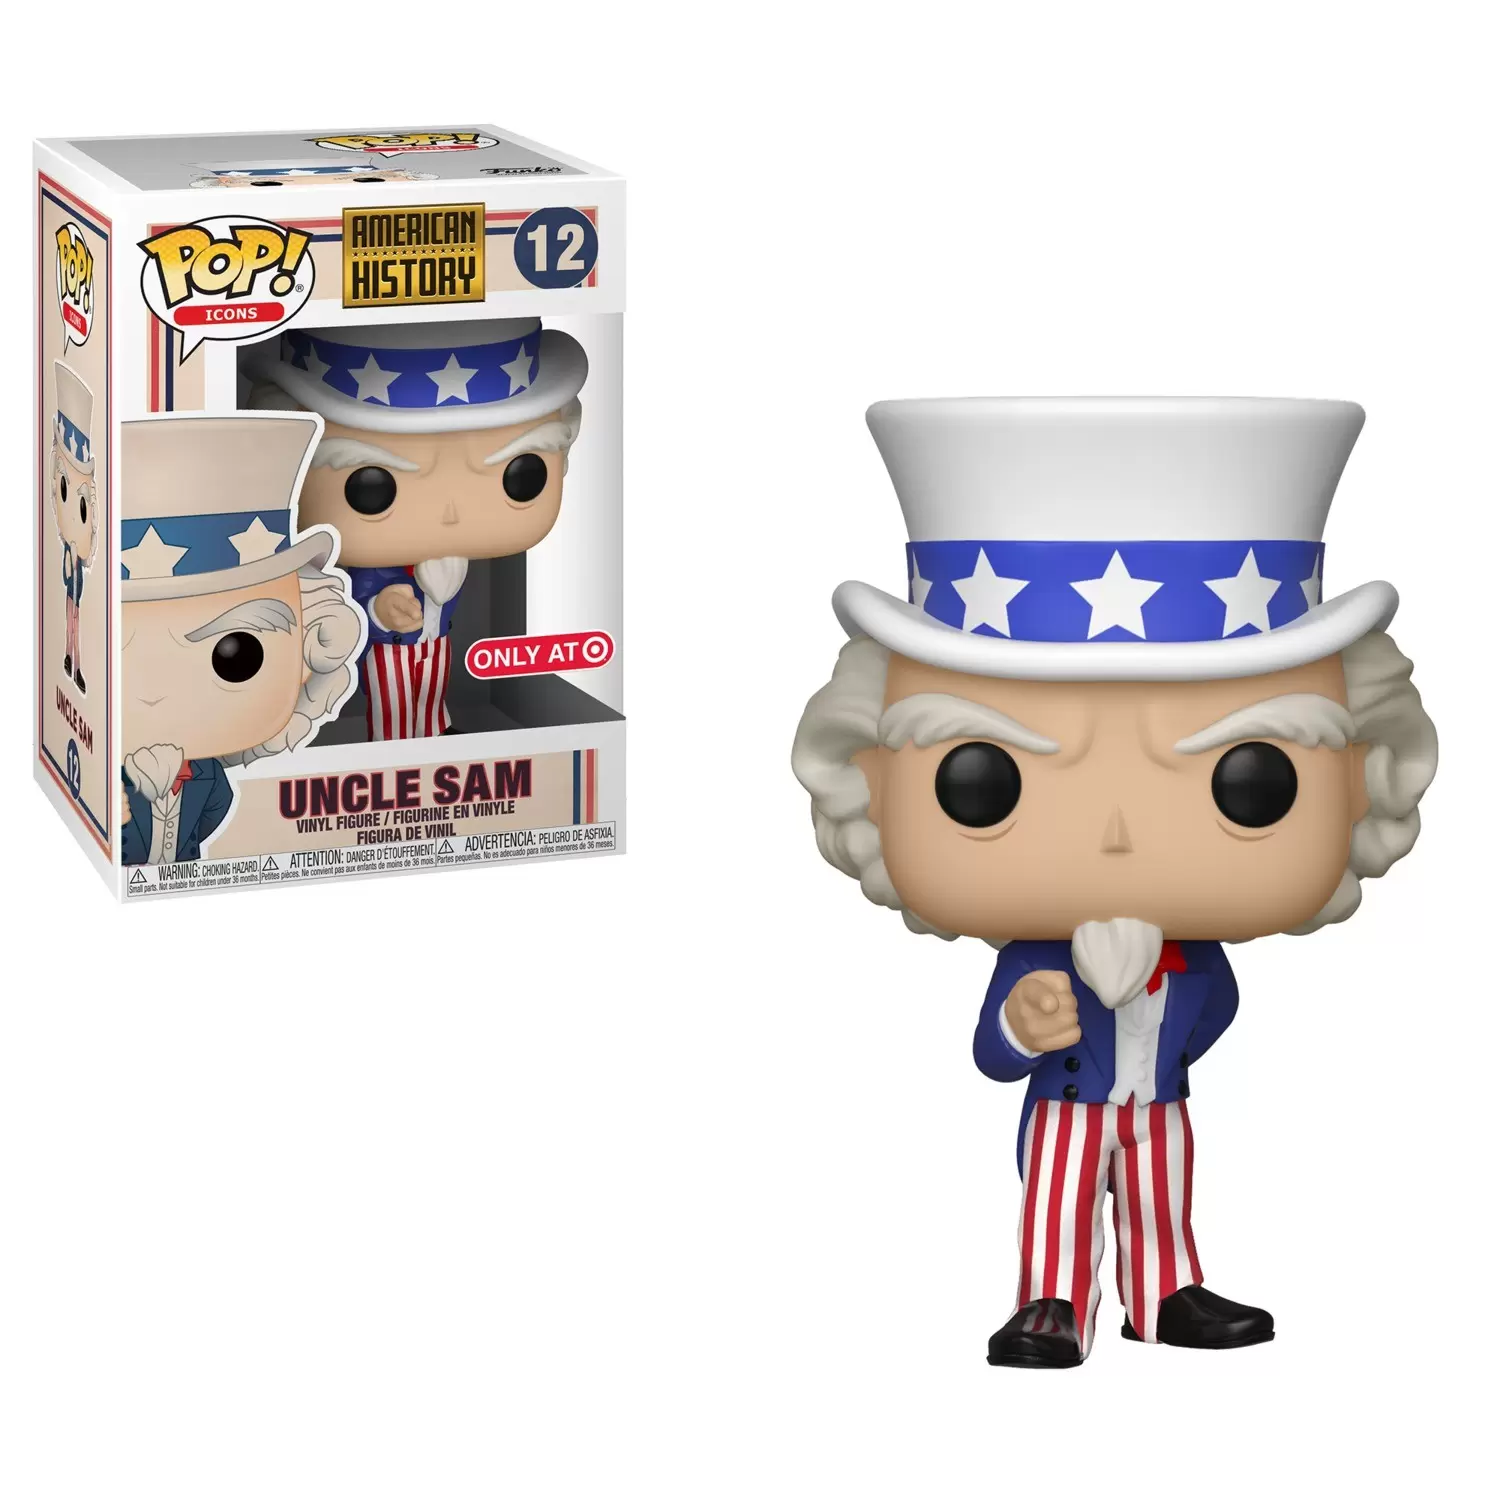 POP! Icons - American History - Uncle Sam